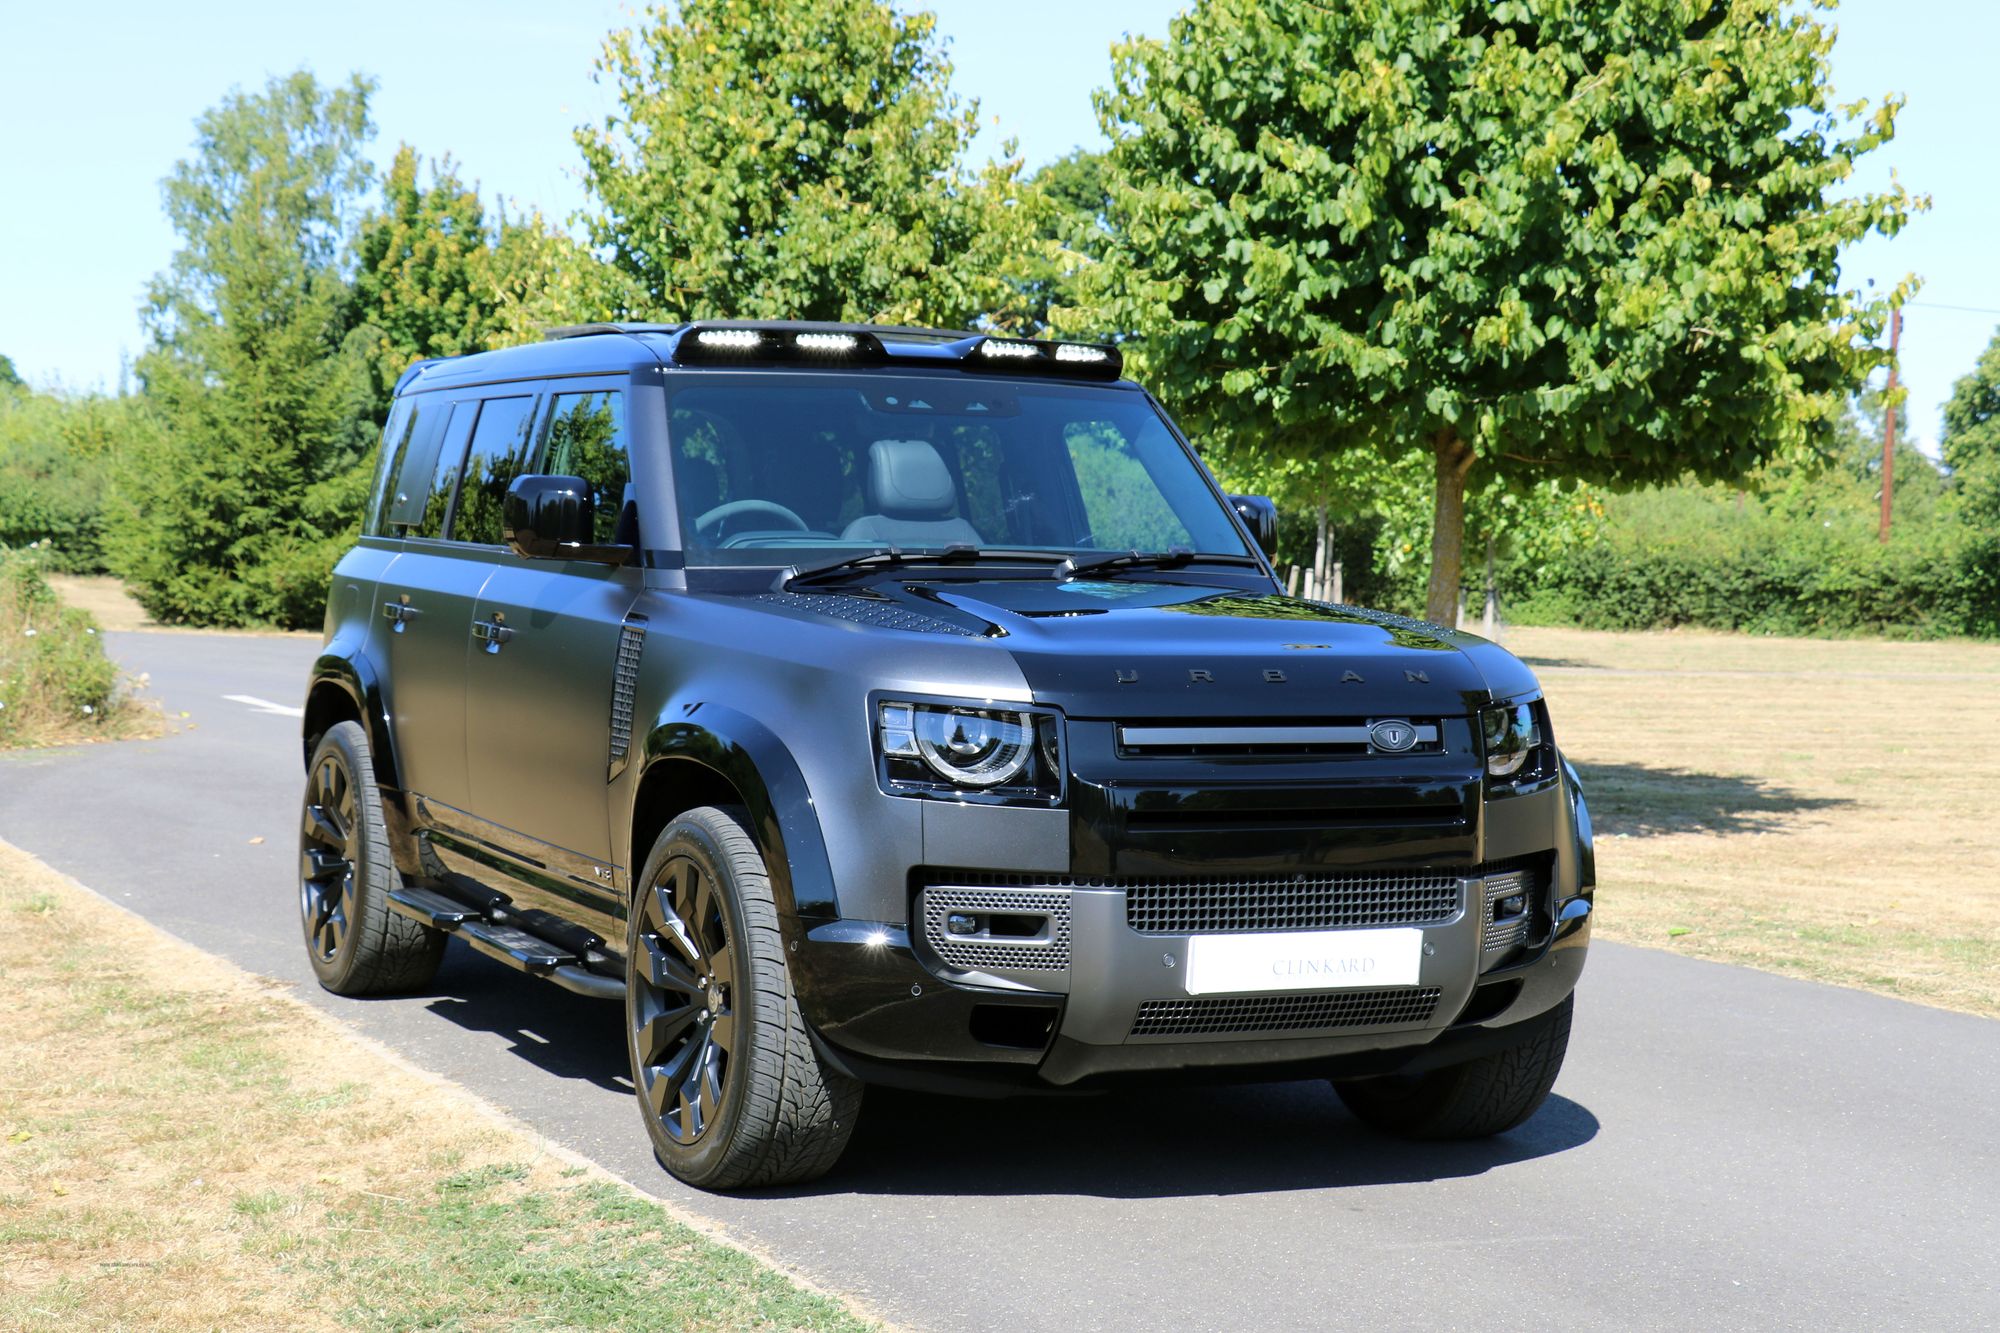 Landrover Defender 110 5.0 V8 Carpathian Edition with Urban Styling